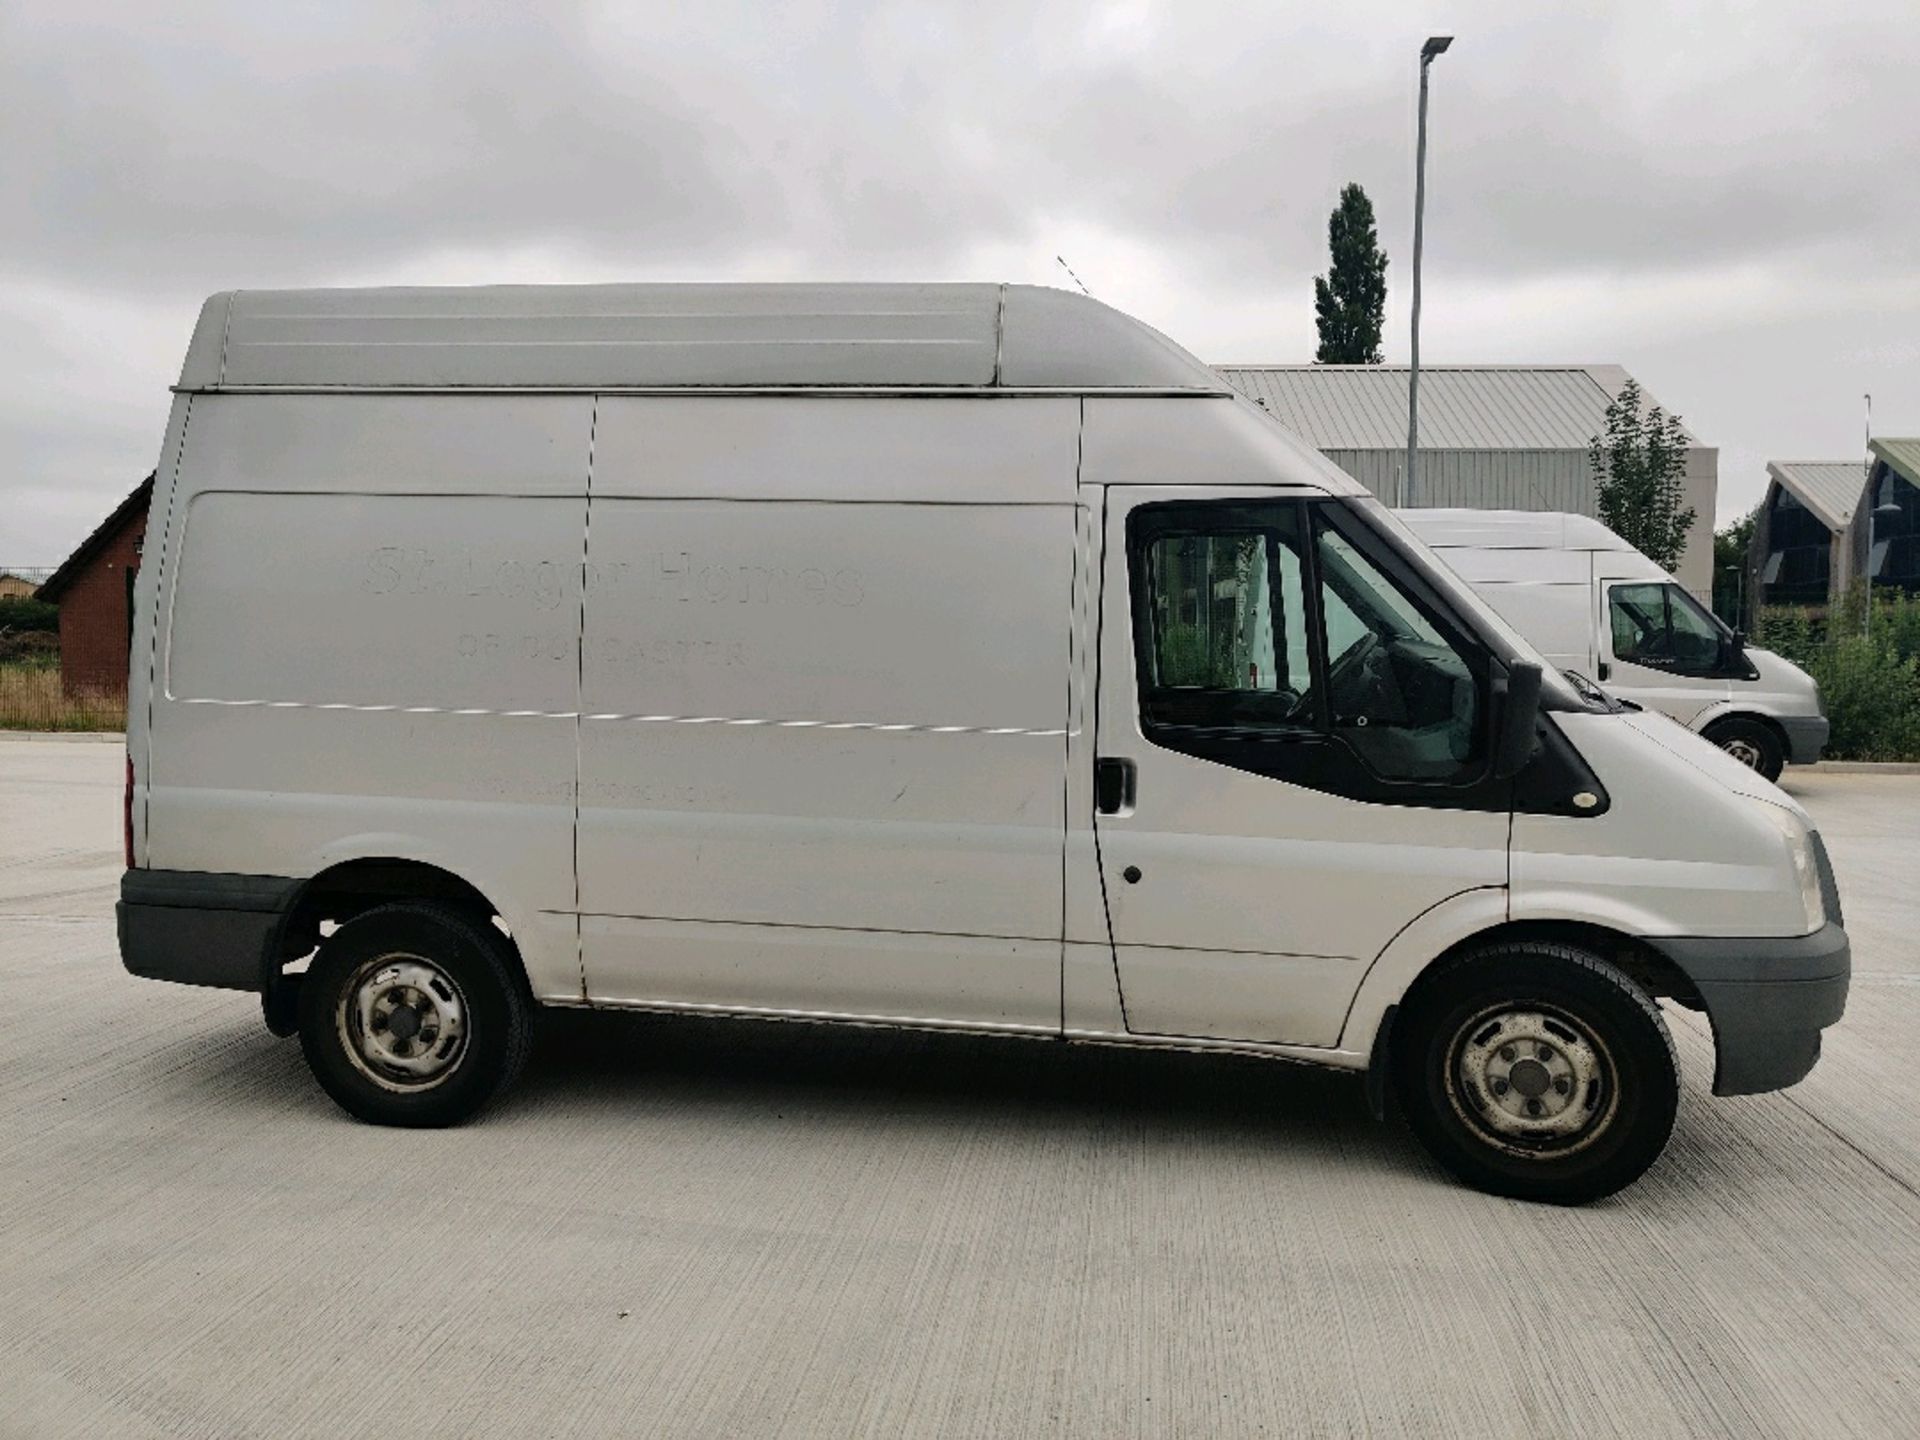 ENTRY DIRECT FROM LOCAL AUTHORITY Ford transit YK60UJD